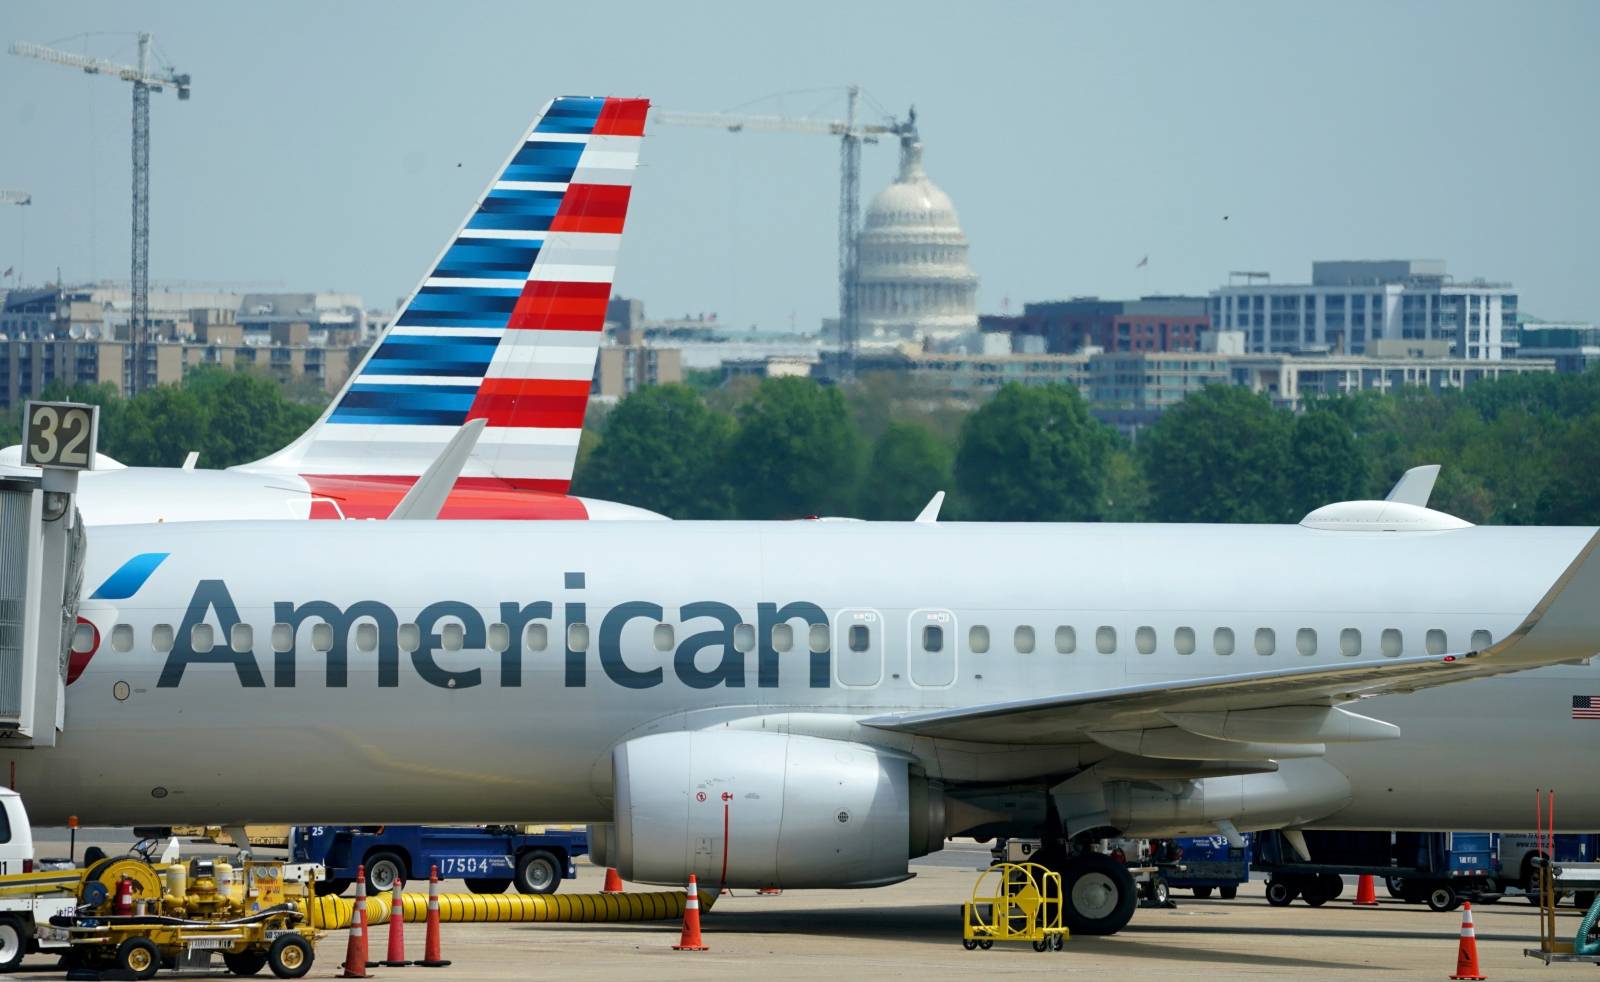 Boeing 737-800 jet sits at a gate at Washington's Reagan National airport with U.S. Capitol building in the background in Washington